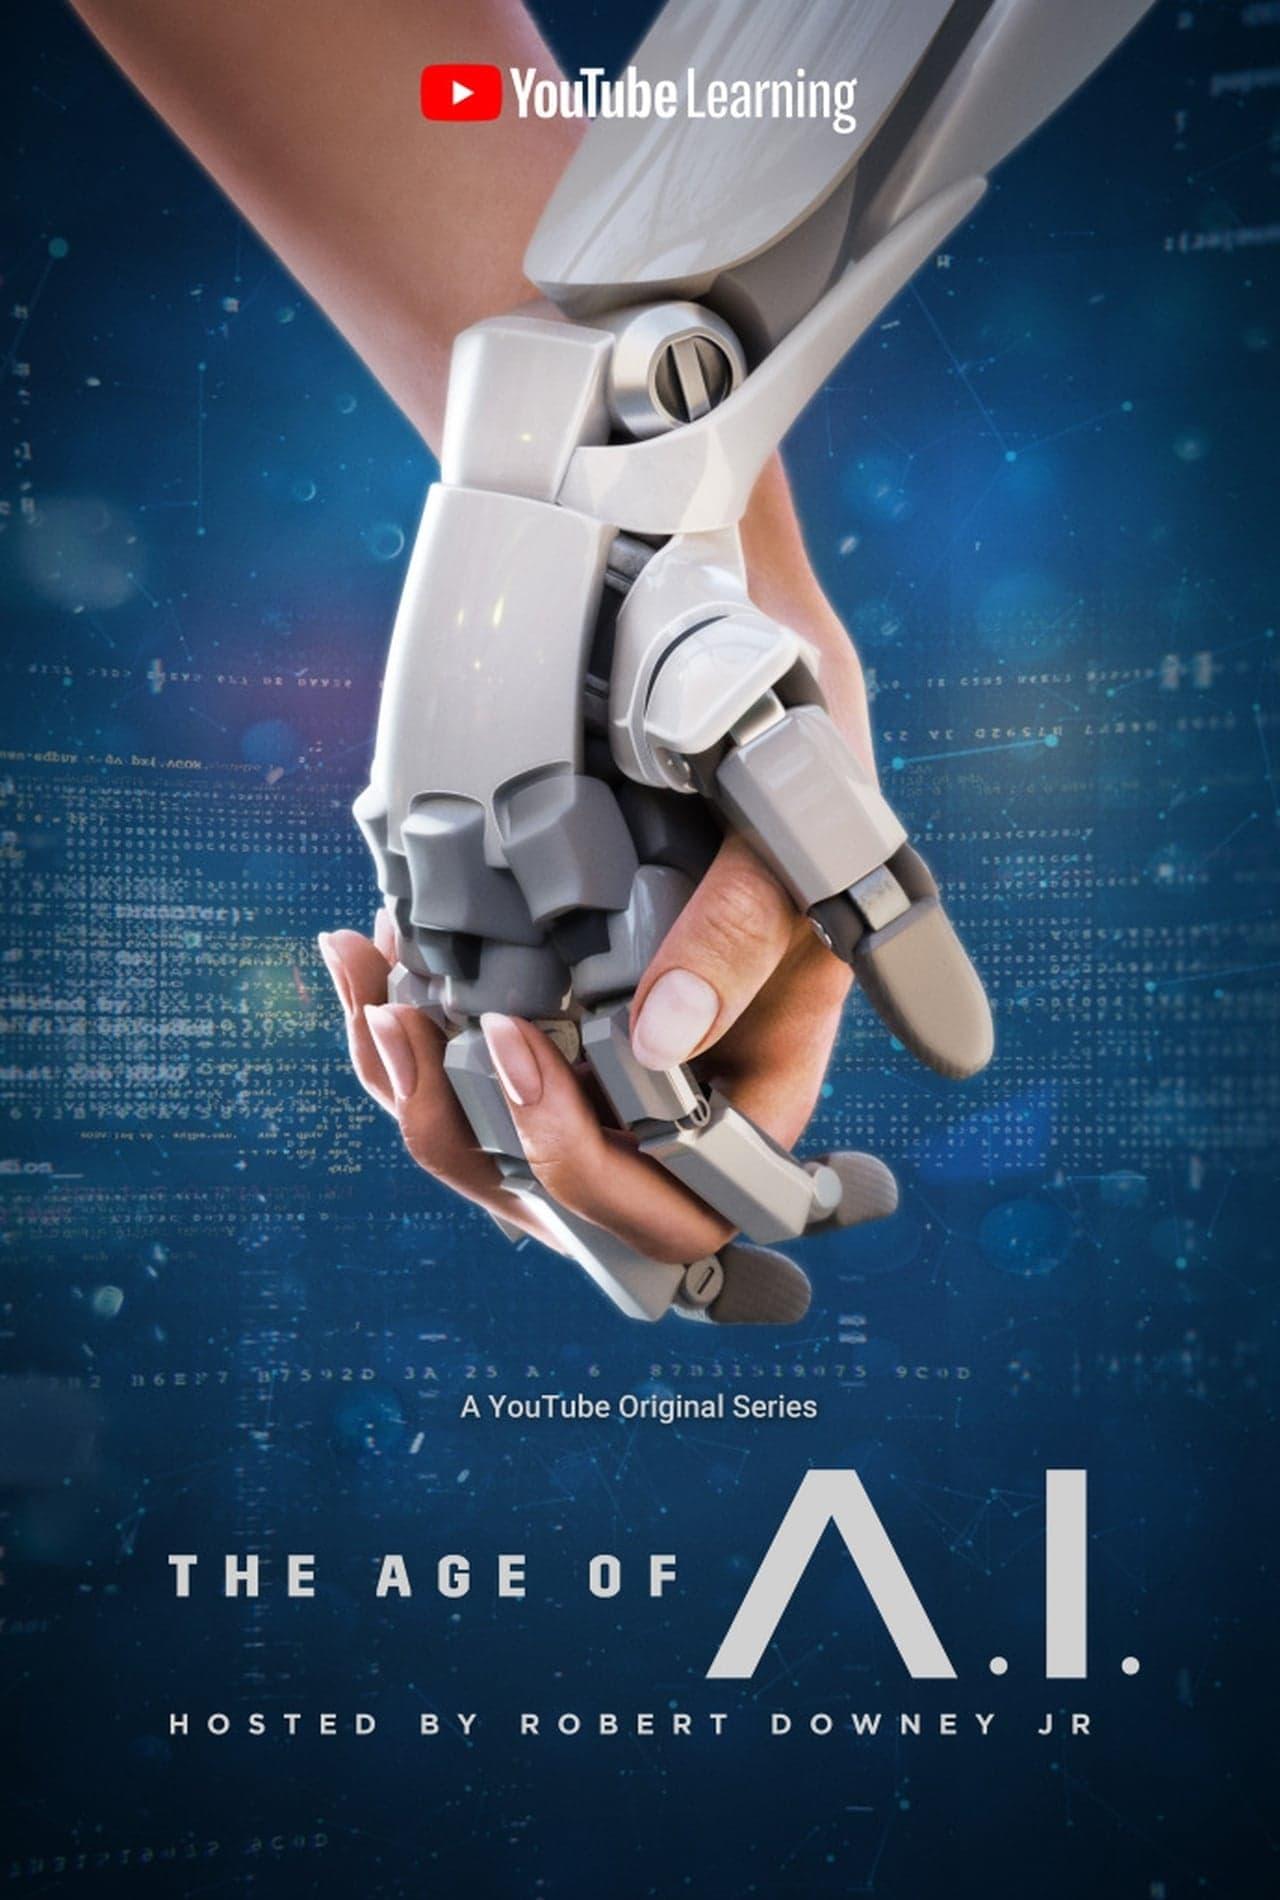 The Age of A.I poster